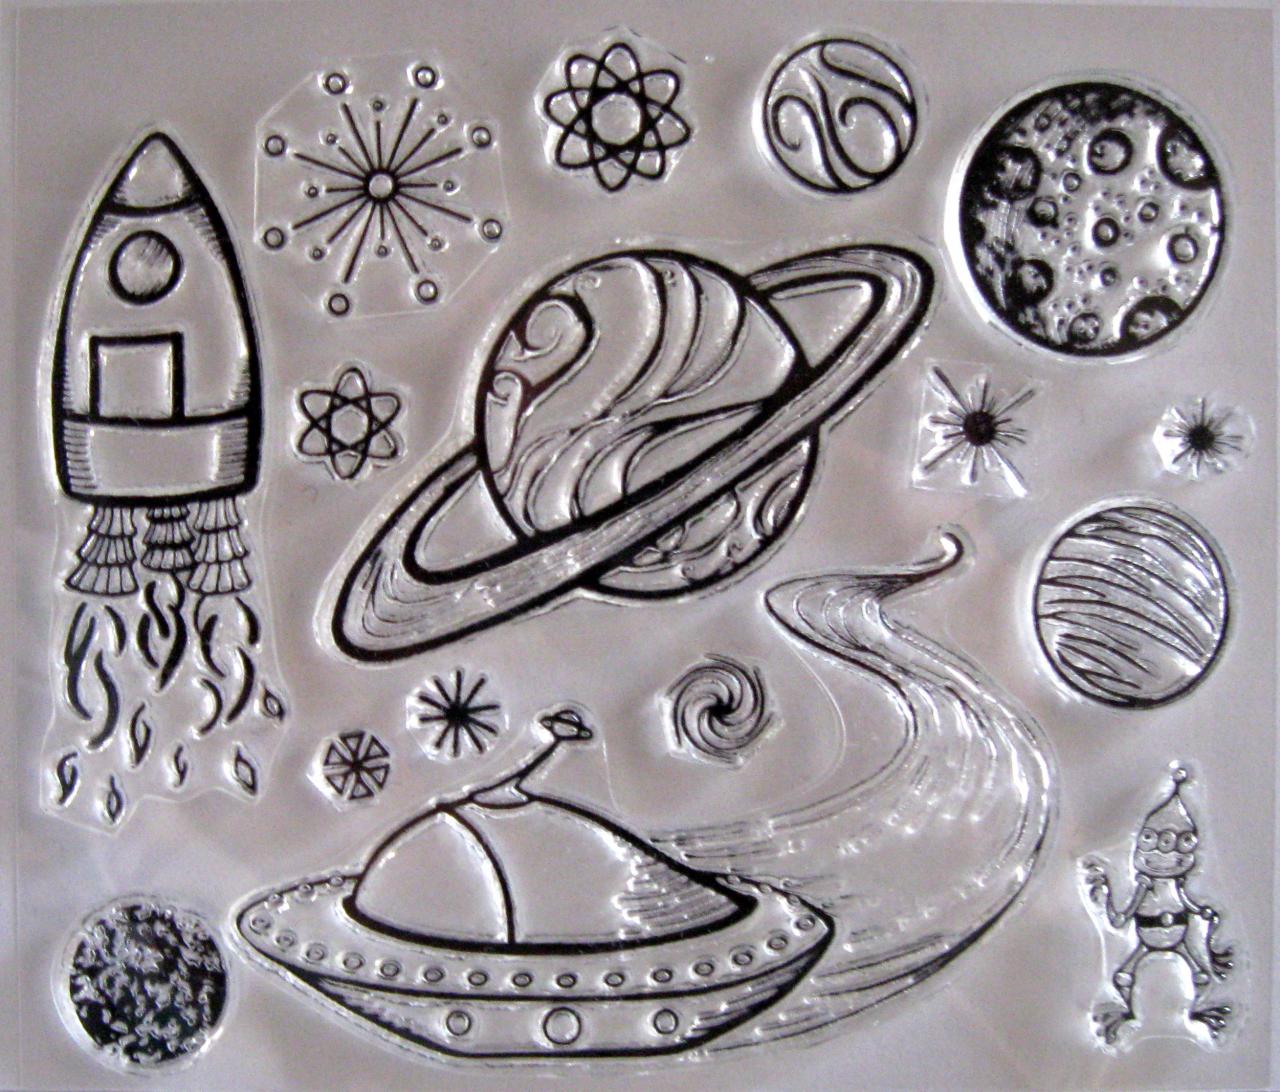 Space, Rockets, Moon, Planets, Rocket Ride Clear Art Stamps